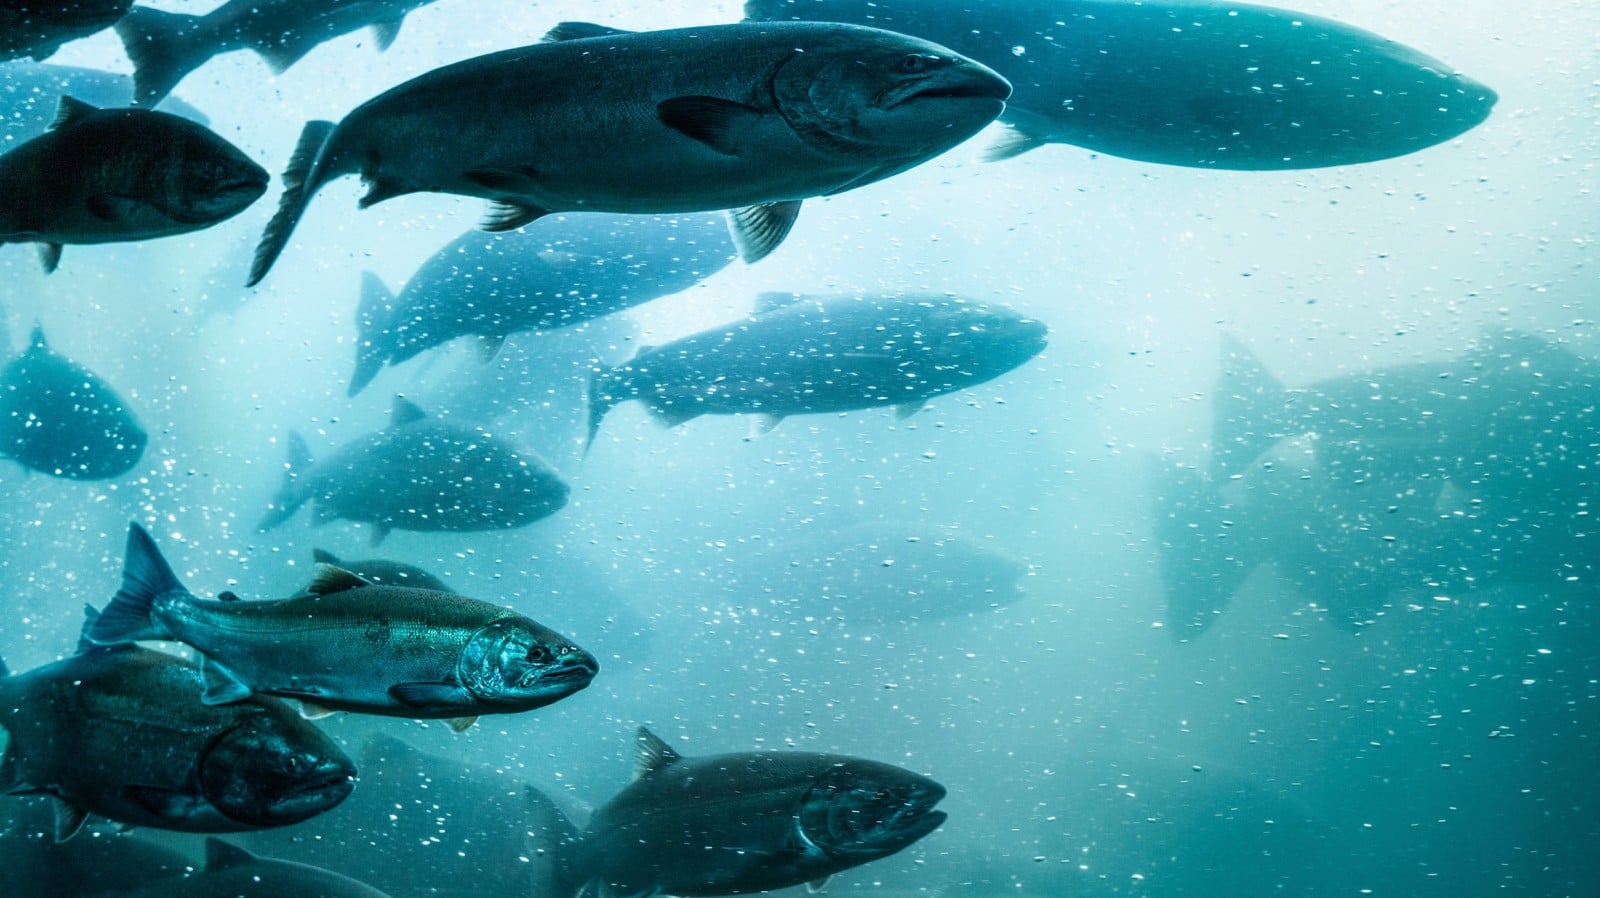 An underwater view of a school of salmon swimming in blue water.